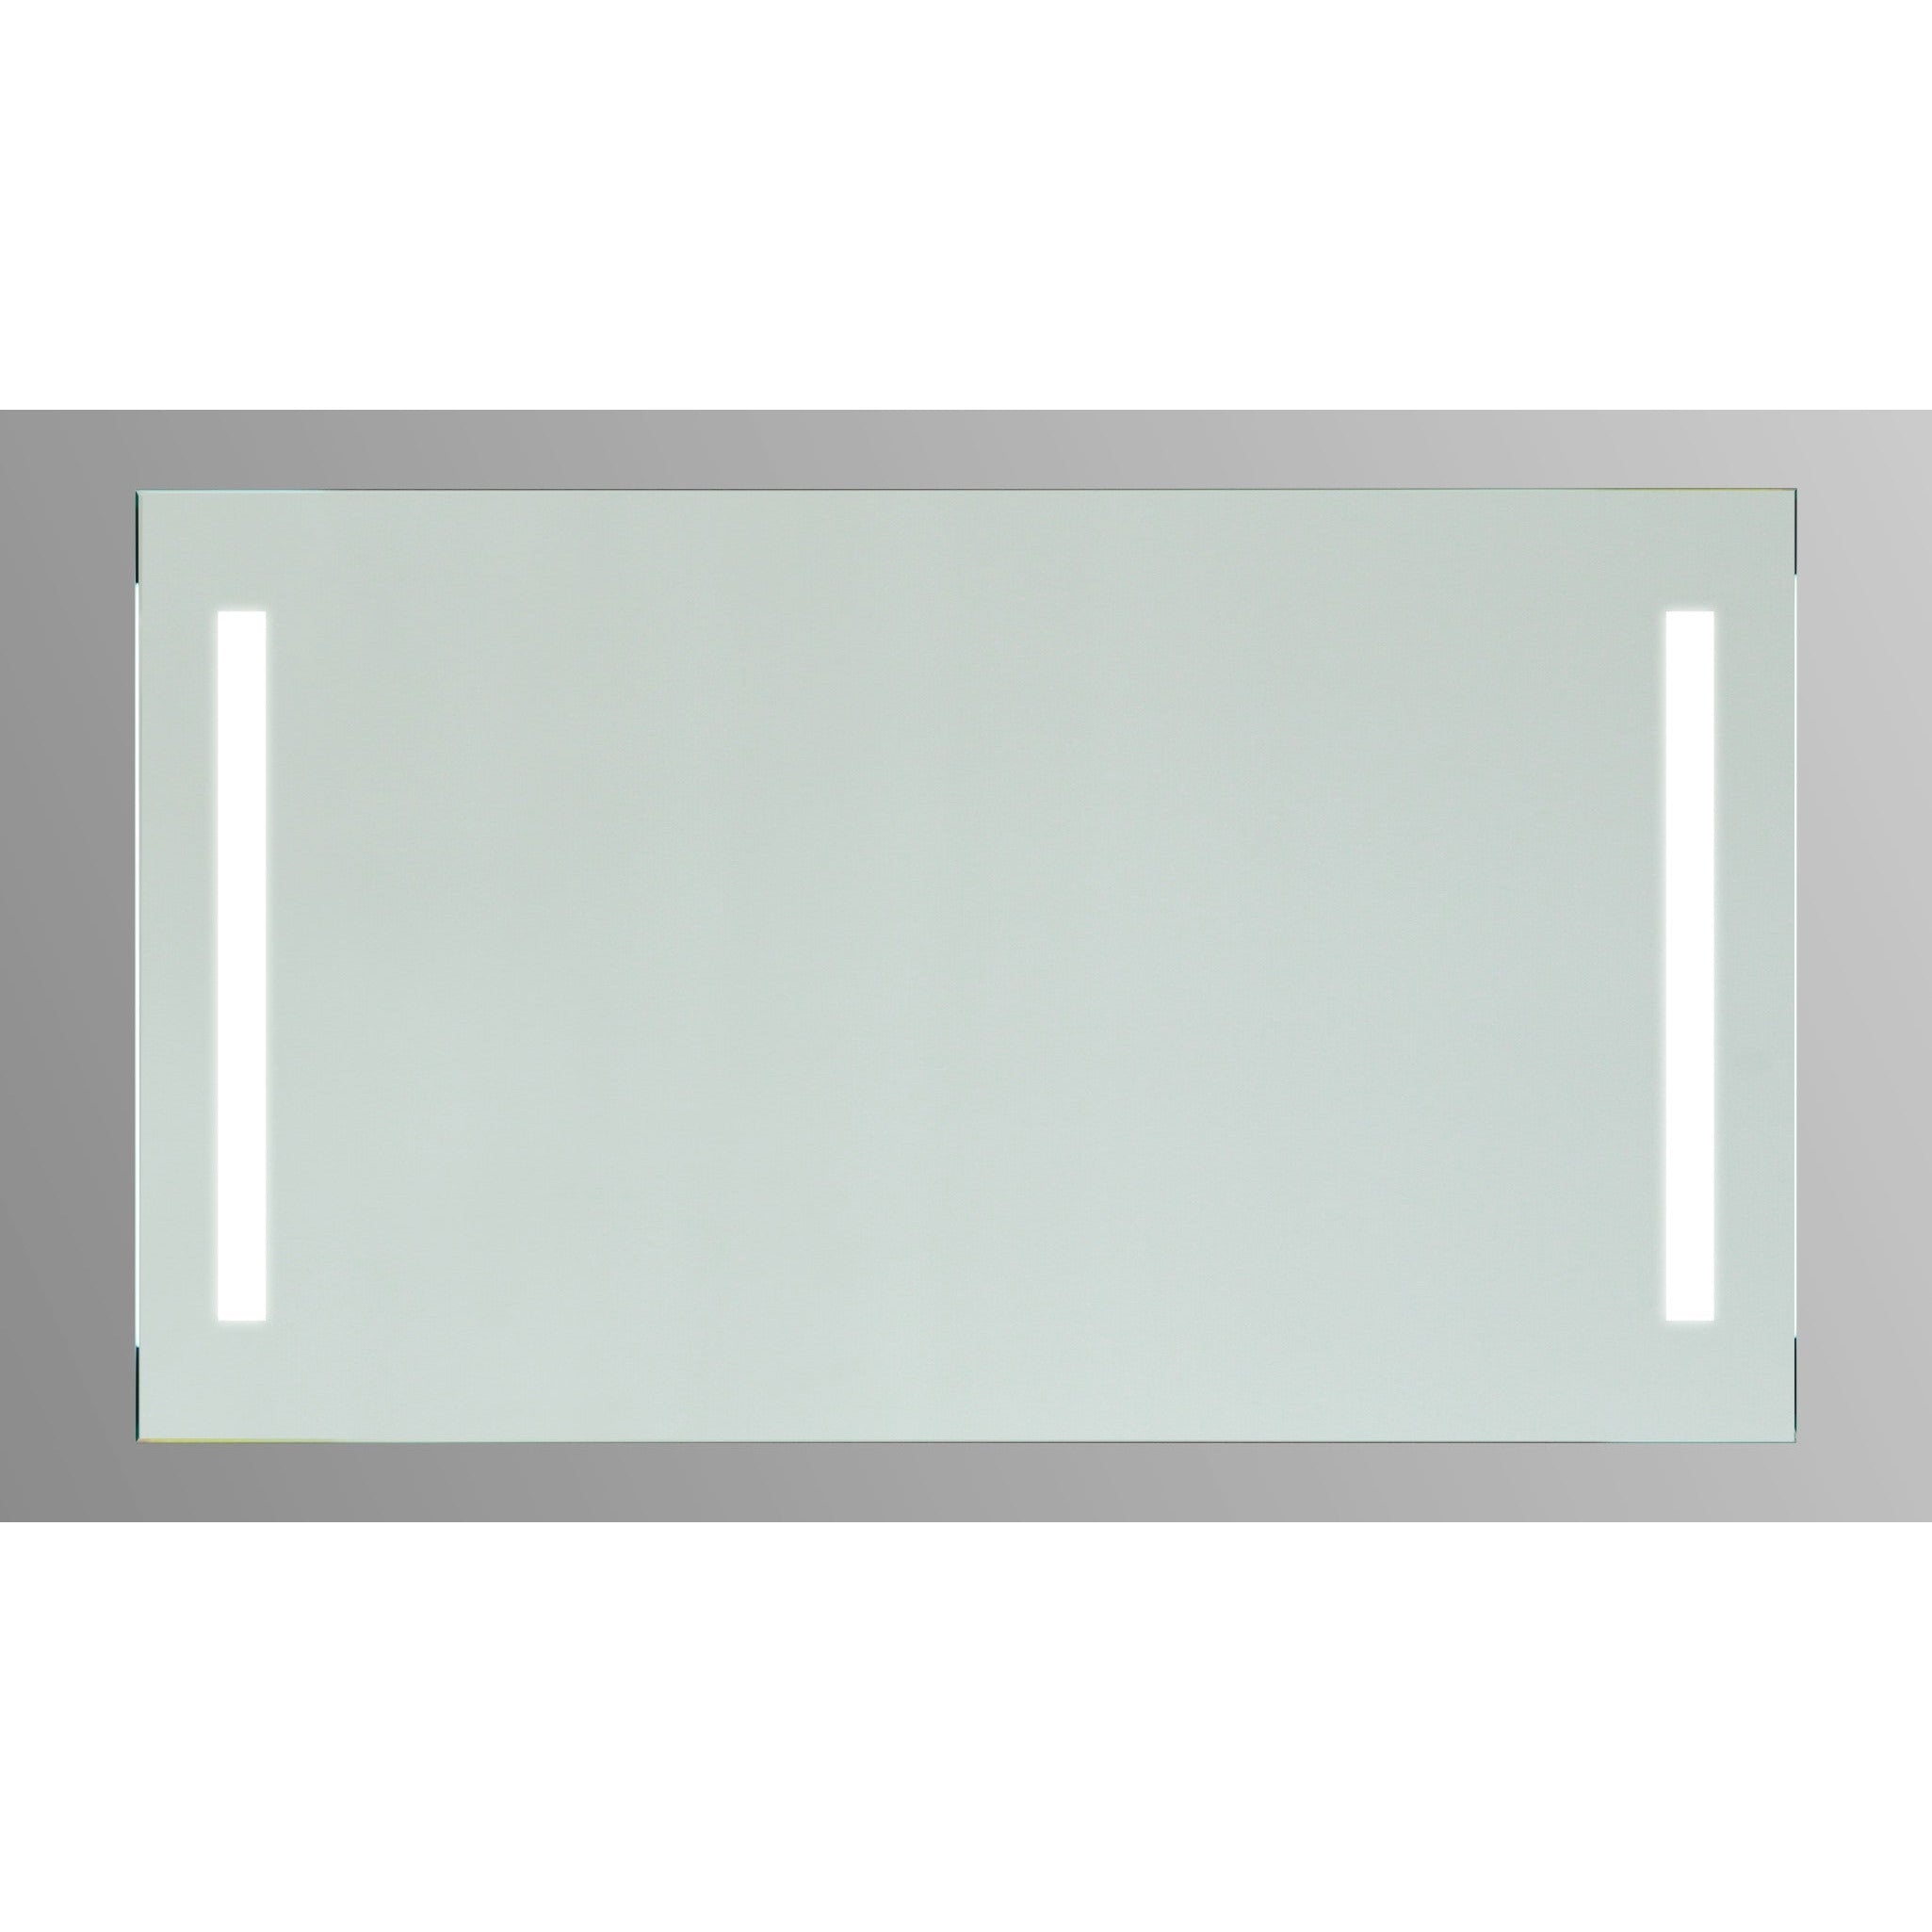 Vanity Art Led Mirror with White and Blue Color+ Sensor Switch - VA1-48